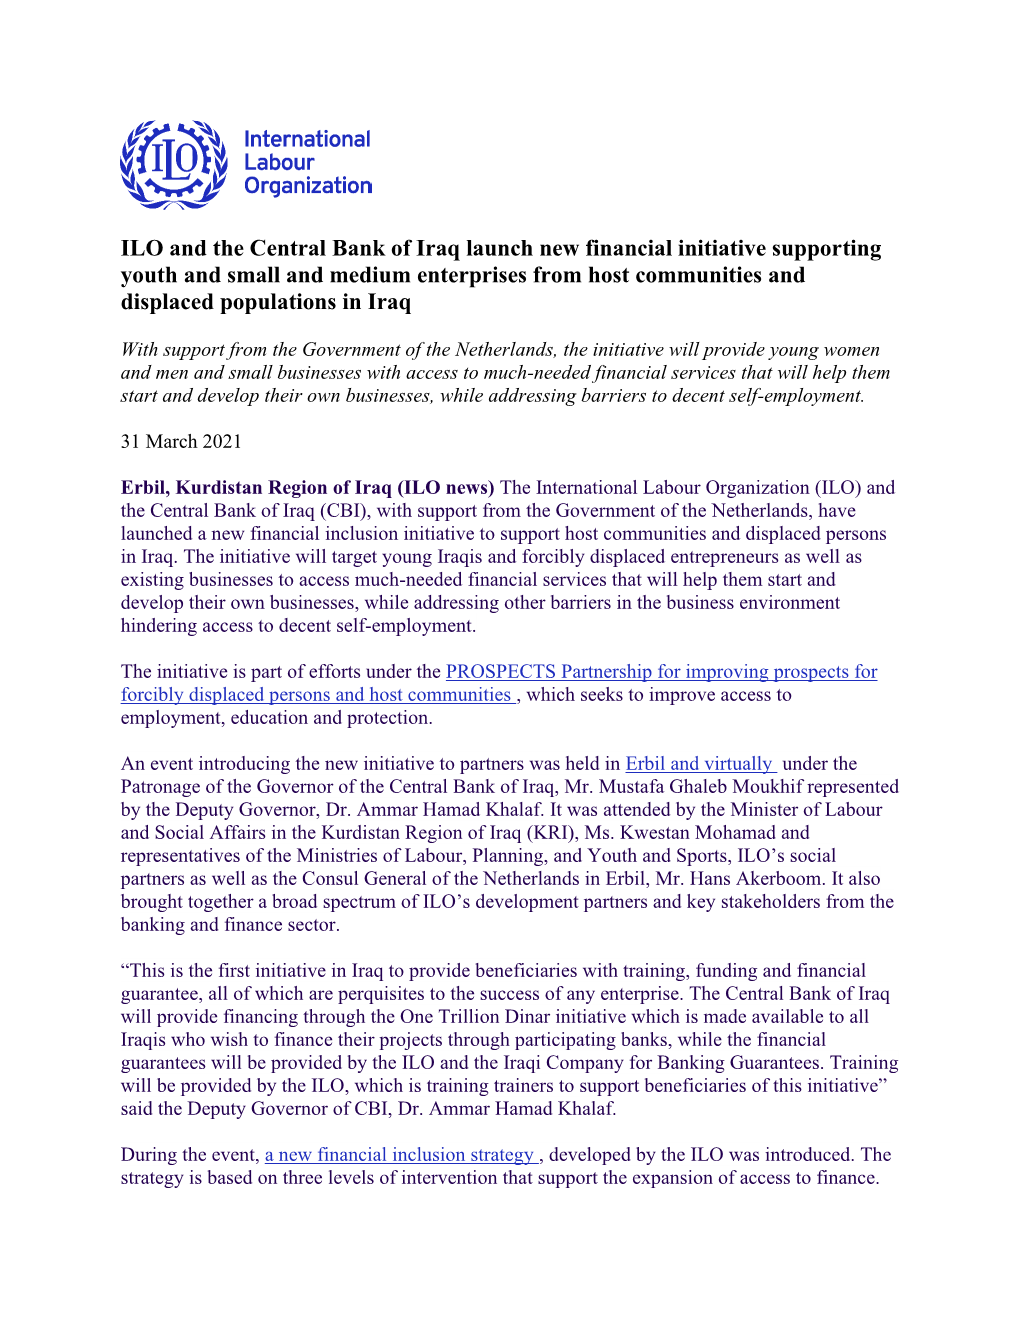 ILO and the Central Bank of Iraq Launch New Financial Initiative